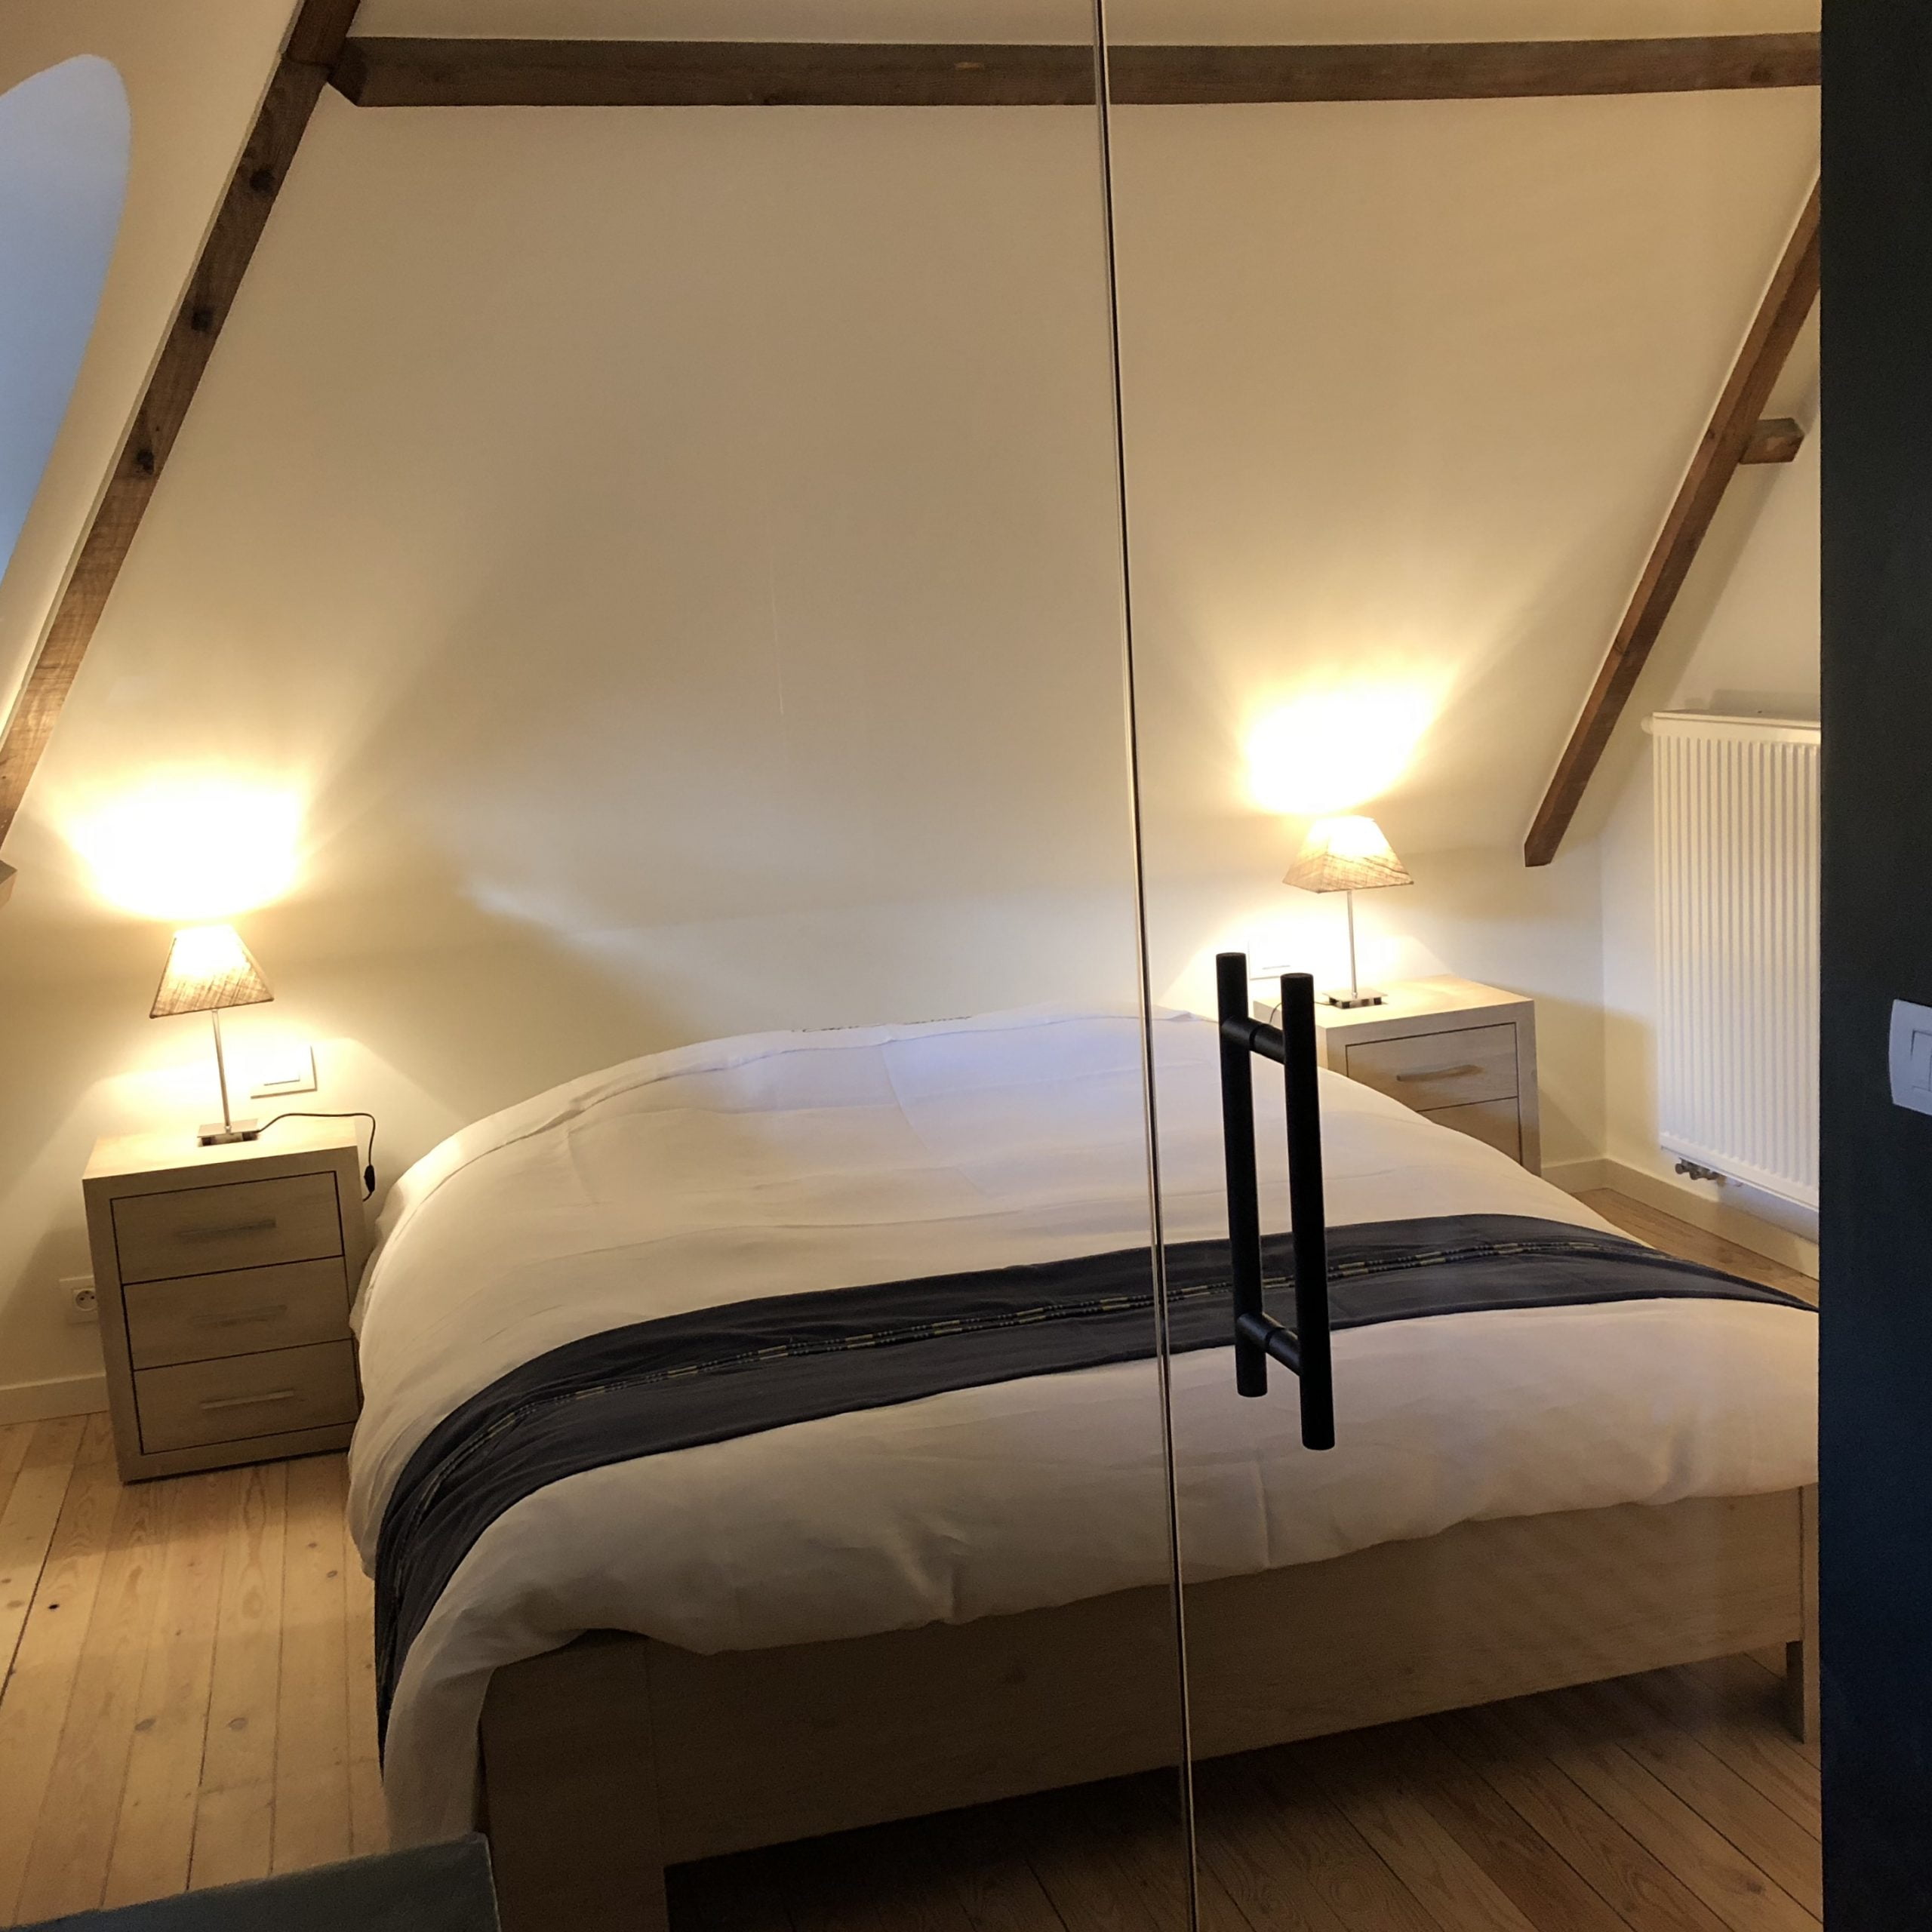 Louse Torla - Luxury expat apartment in Ghent